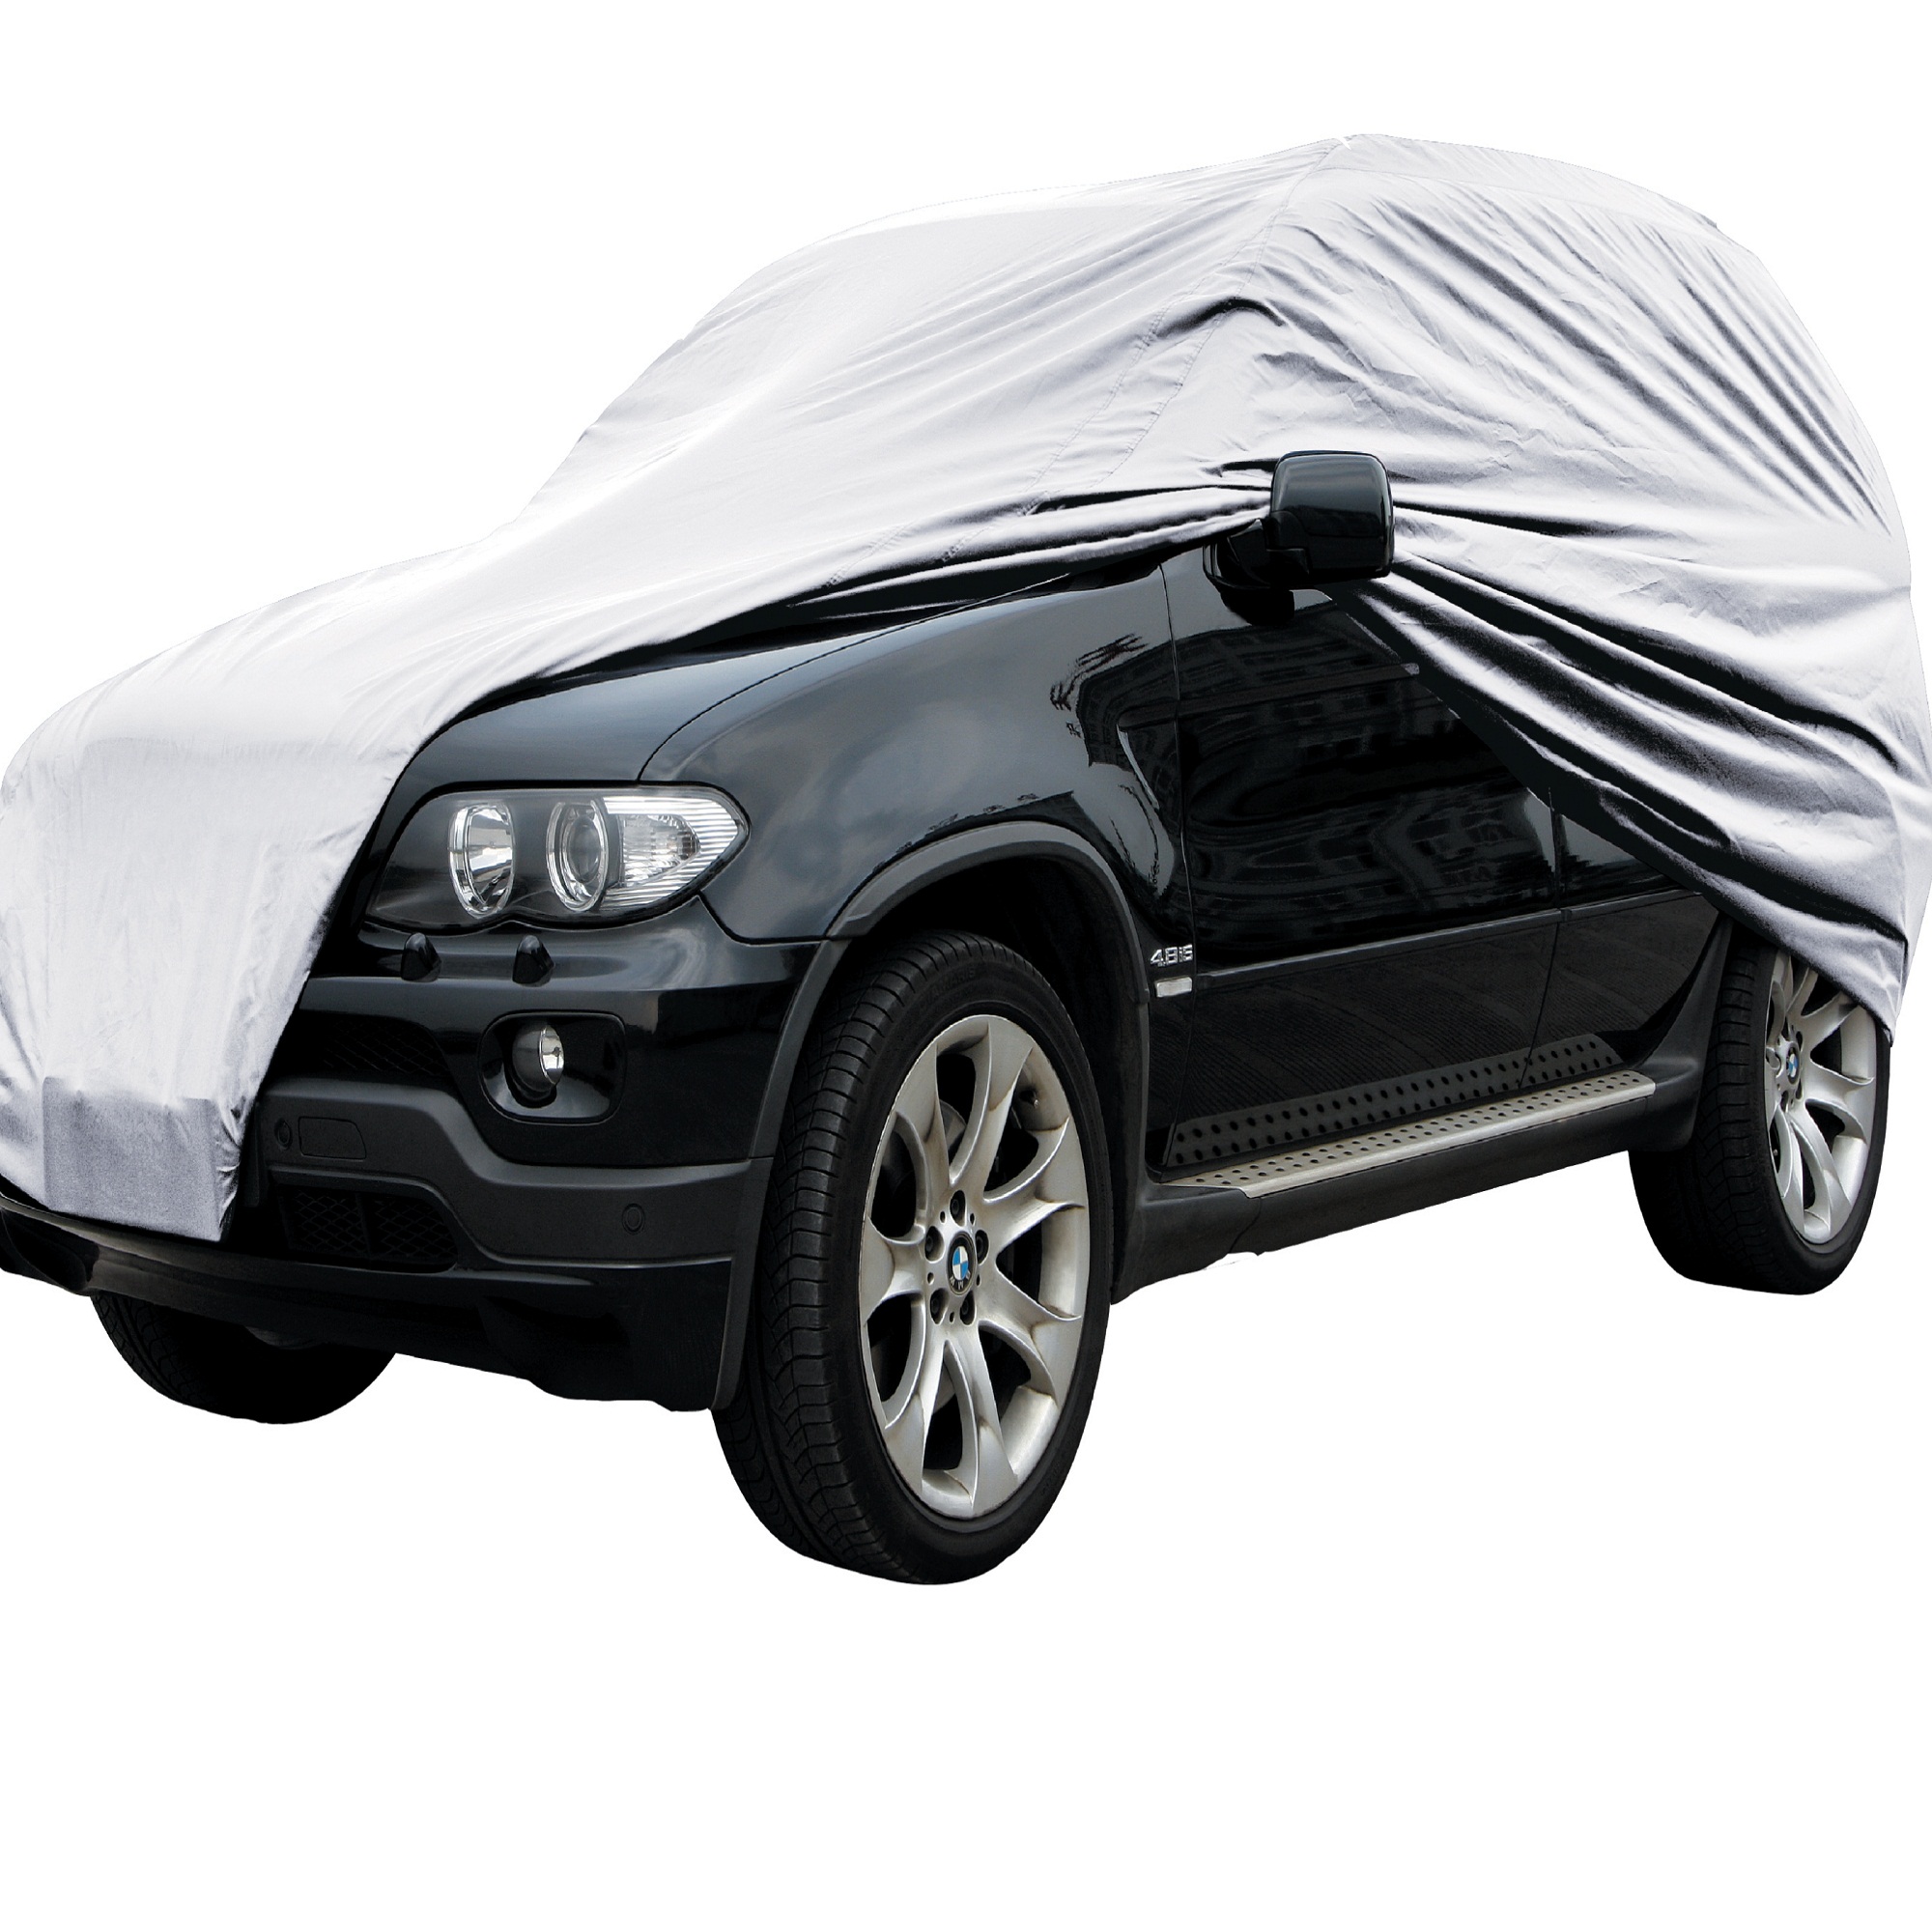 Allweather Perfect Gray Car Cover UV Waterproof Outdoor for Chevrolet Spark